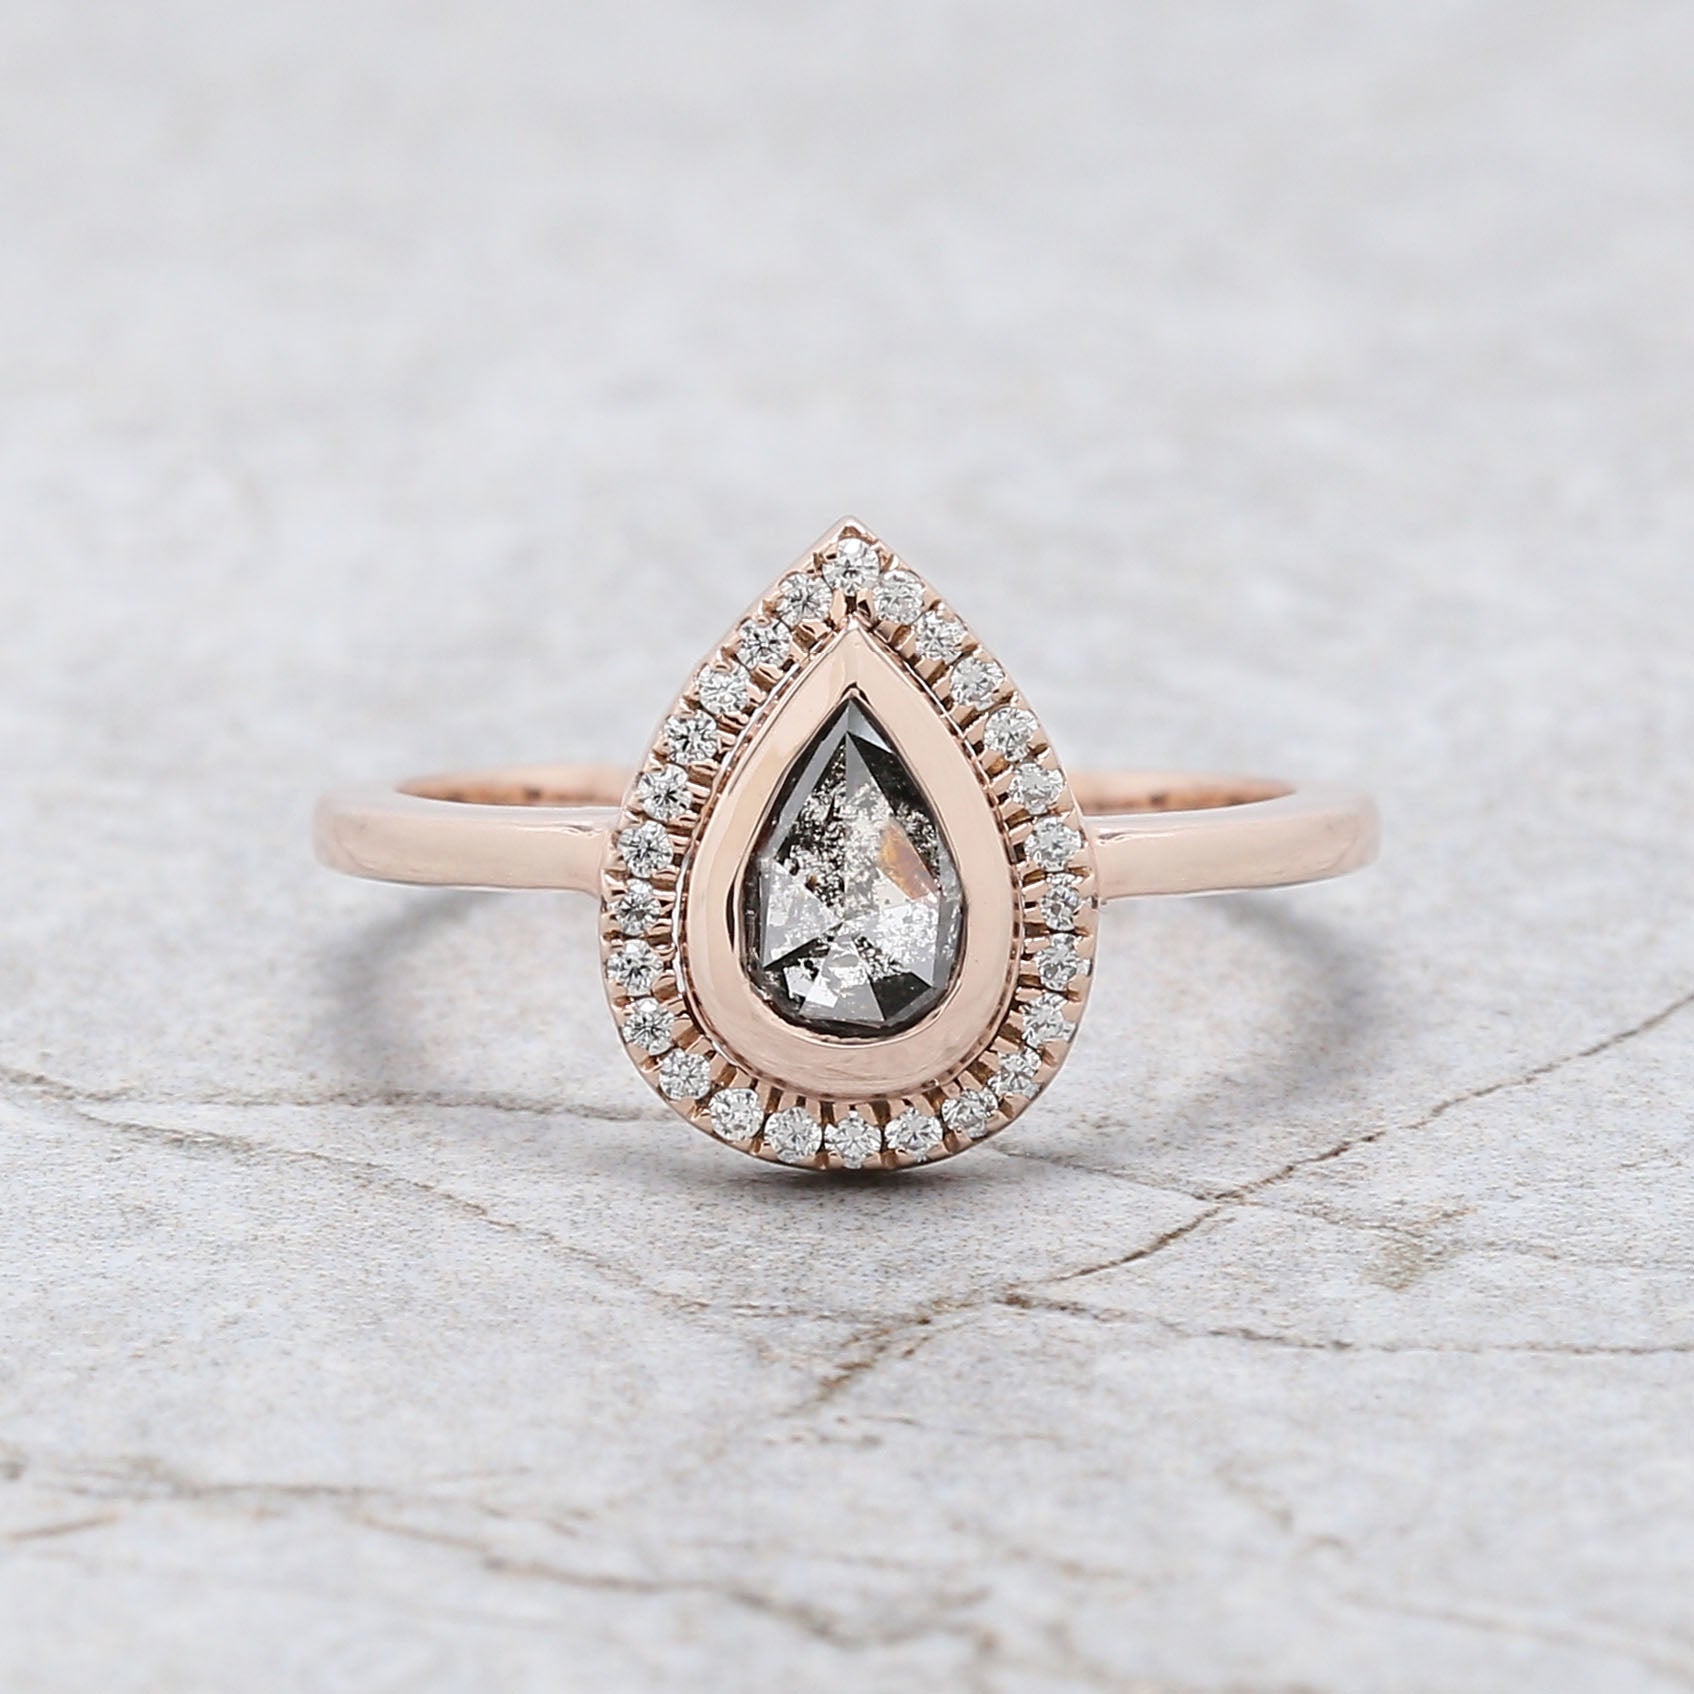 Pear Cut Salt And Pepper Diamond Ring 0.53 Ct 6.75 MM Pear Diamond Ring 14K Solid Rose Gold Silver Engagement Pear Ring Gift For Her QN8743